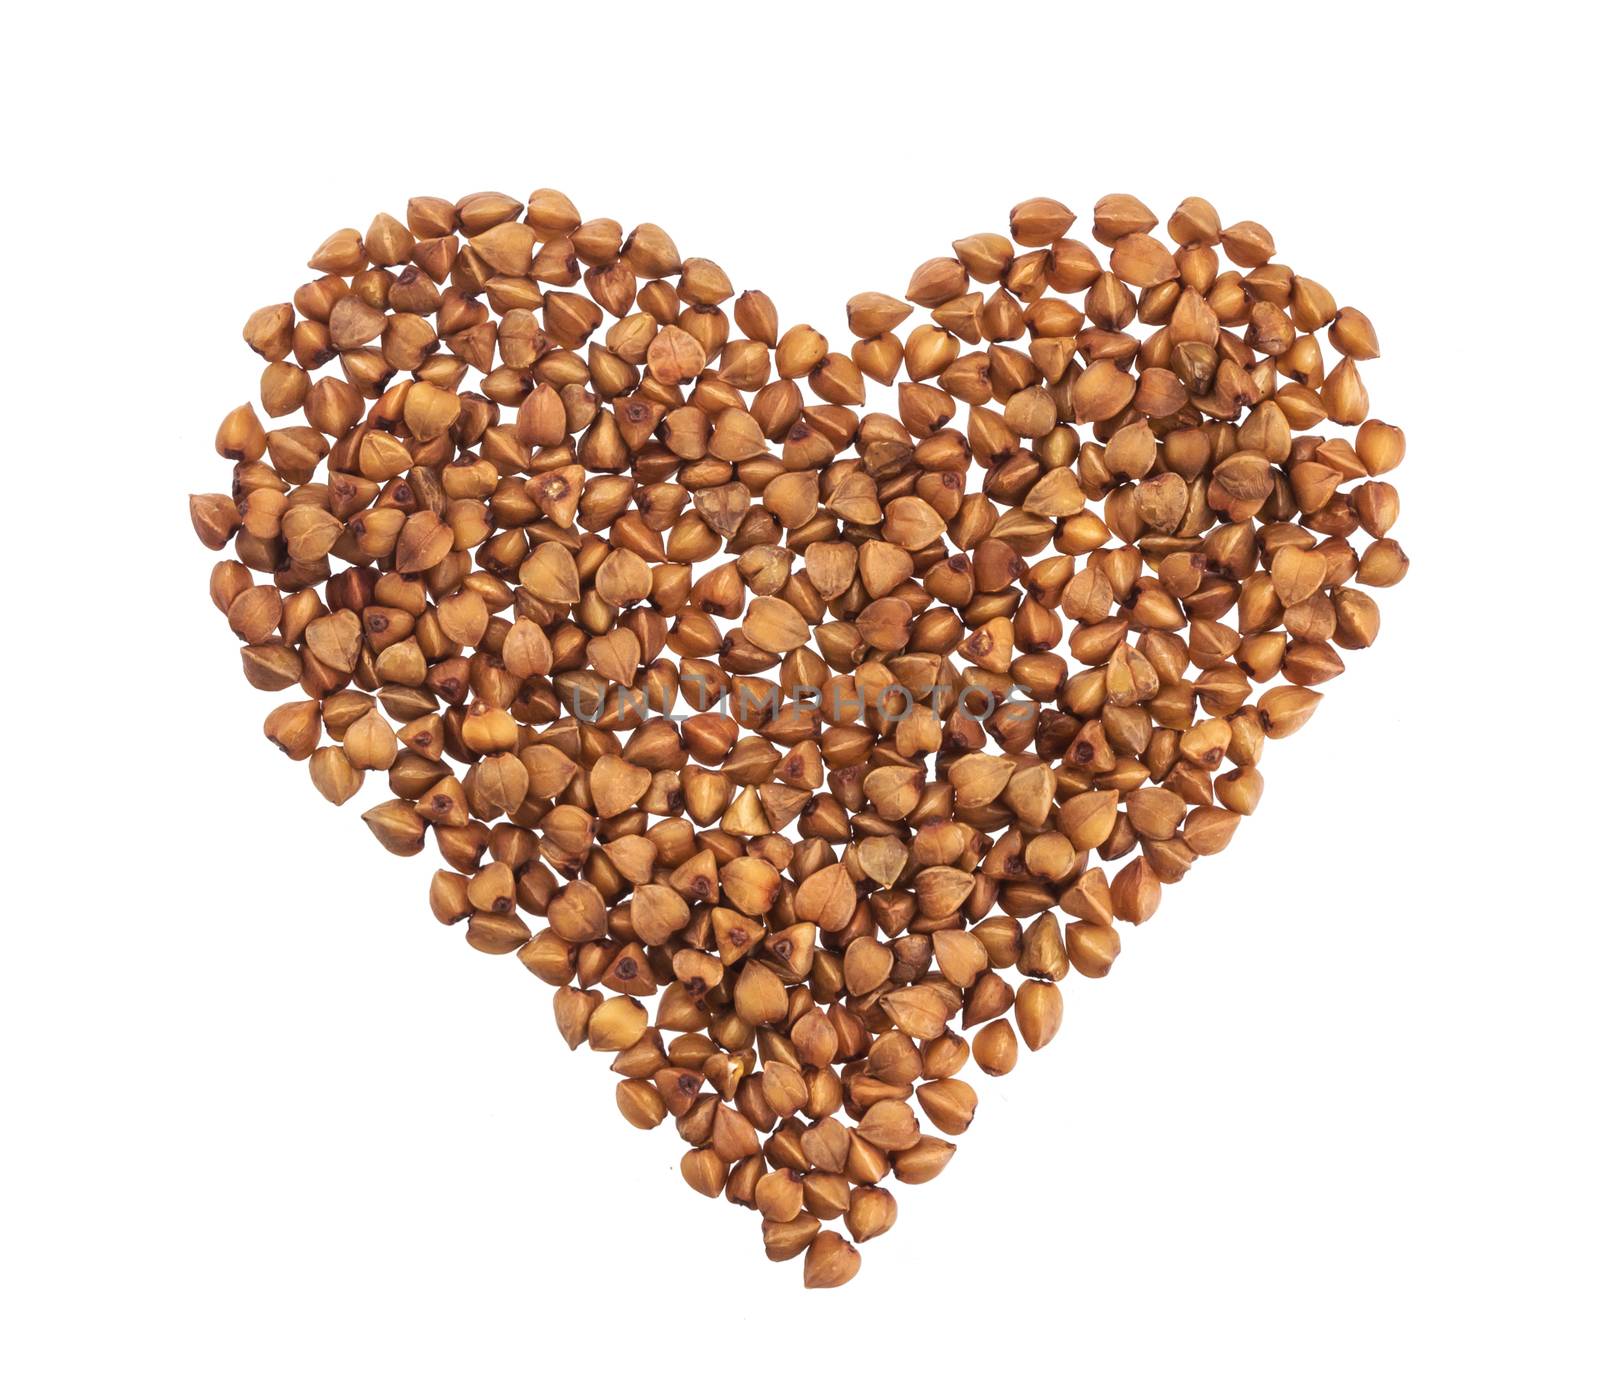 Pile of buckwheat in the shape of heart isolated on white background with clipping path